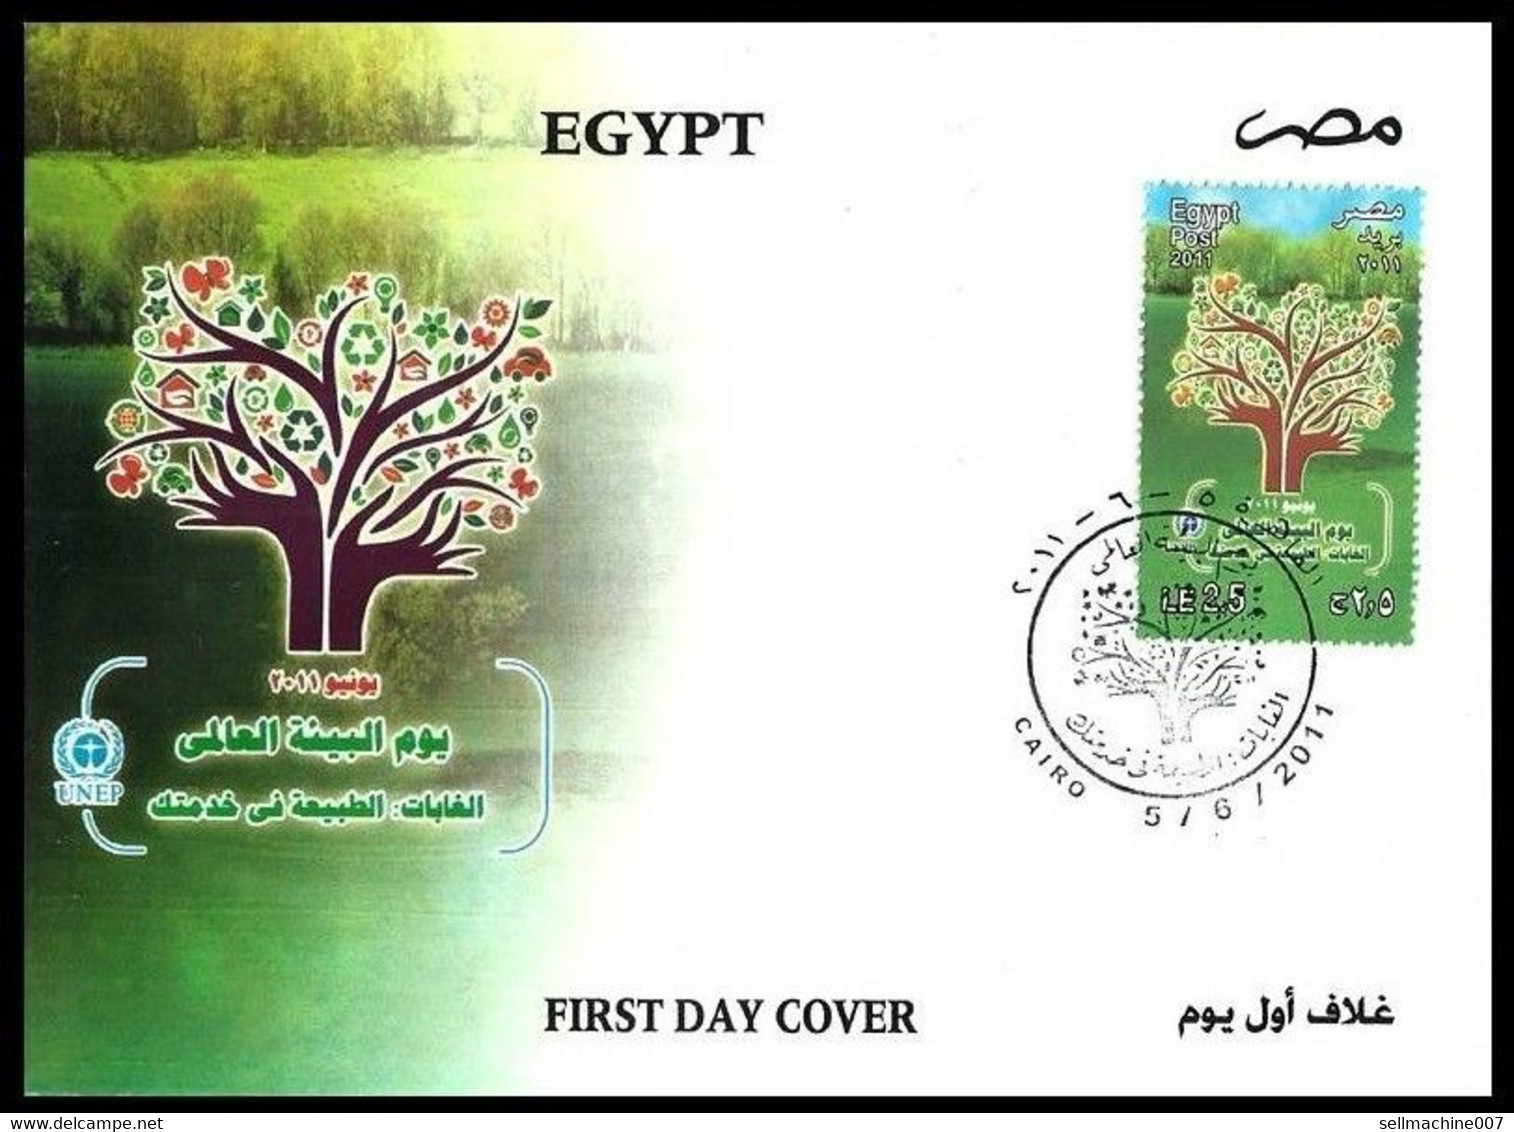 EGYPT 2011 FIRST DAY COVER / FDC ENVIRONMENT DAY / NATURAL FORESTS - Brieven En Documenten